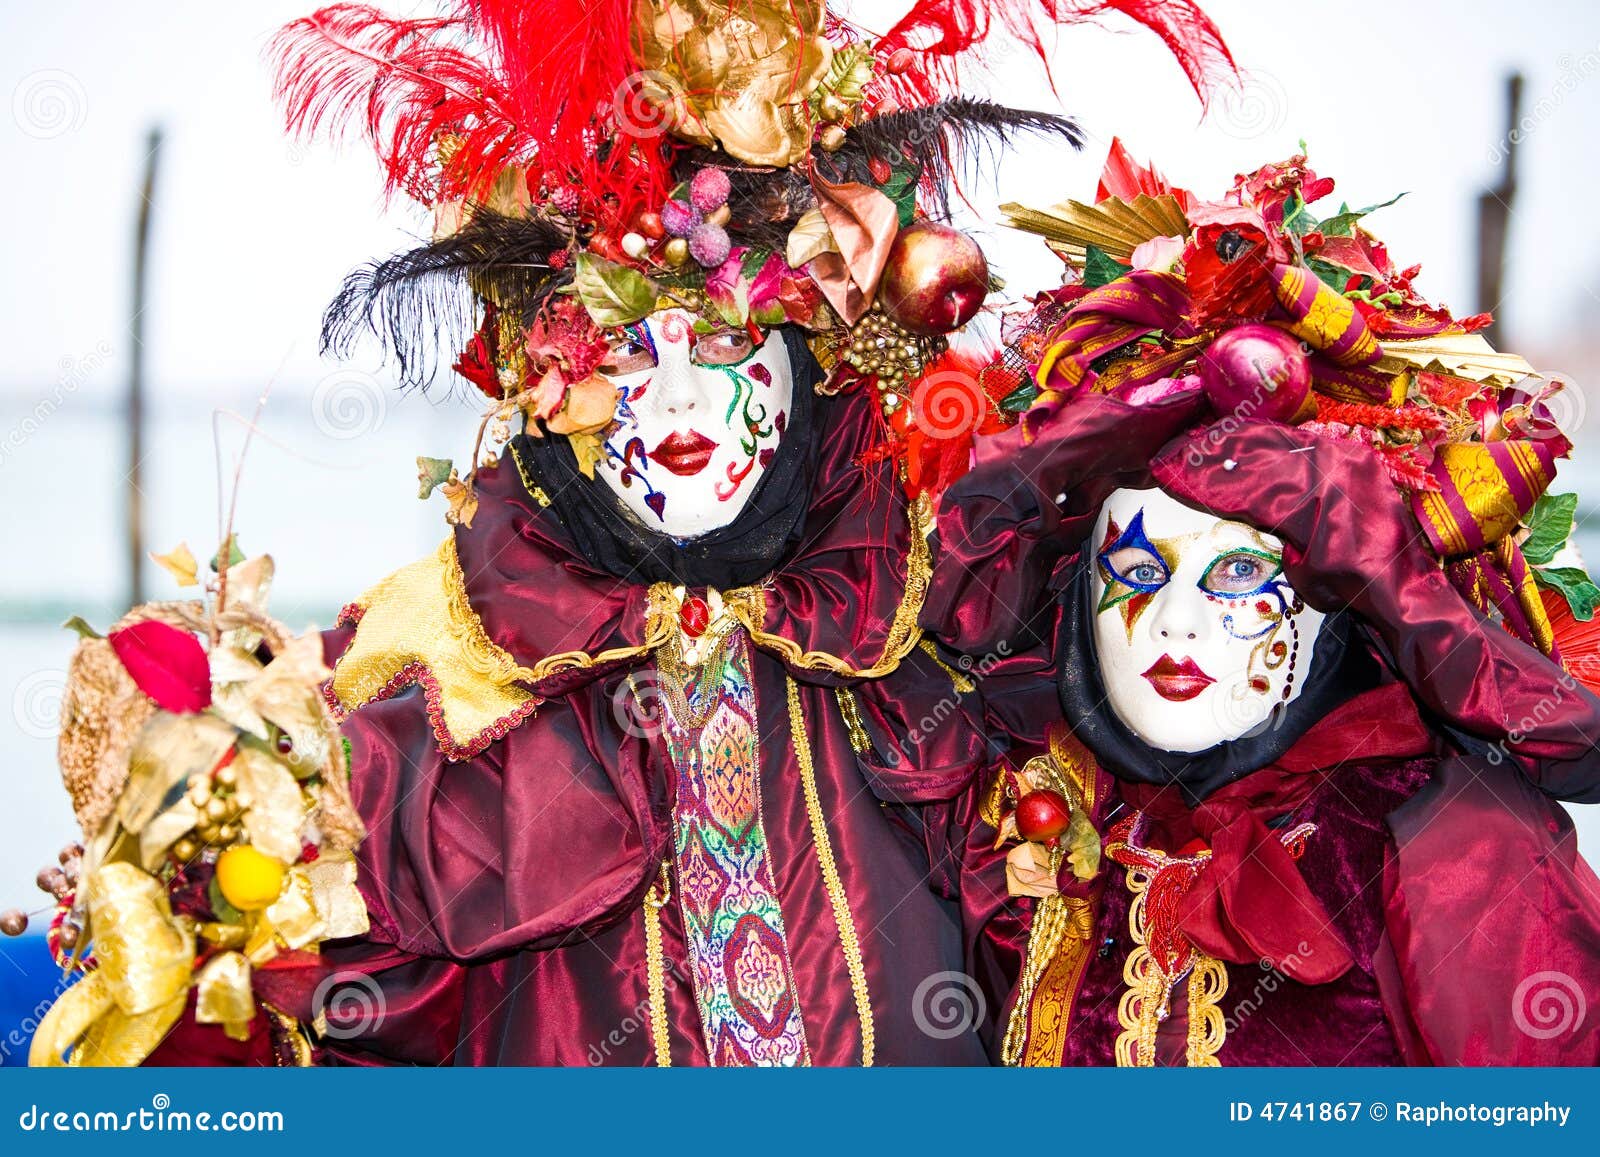 Red and Gold Fancy Costumes Stock Image - Image of europe, holiday: 4741867